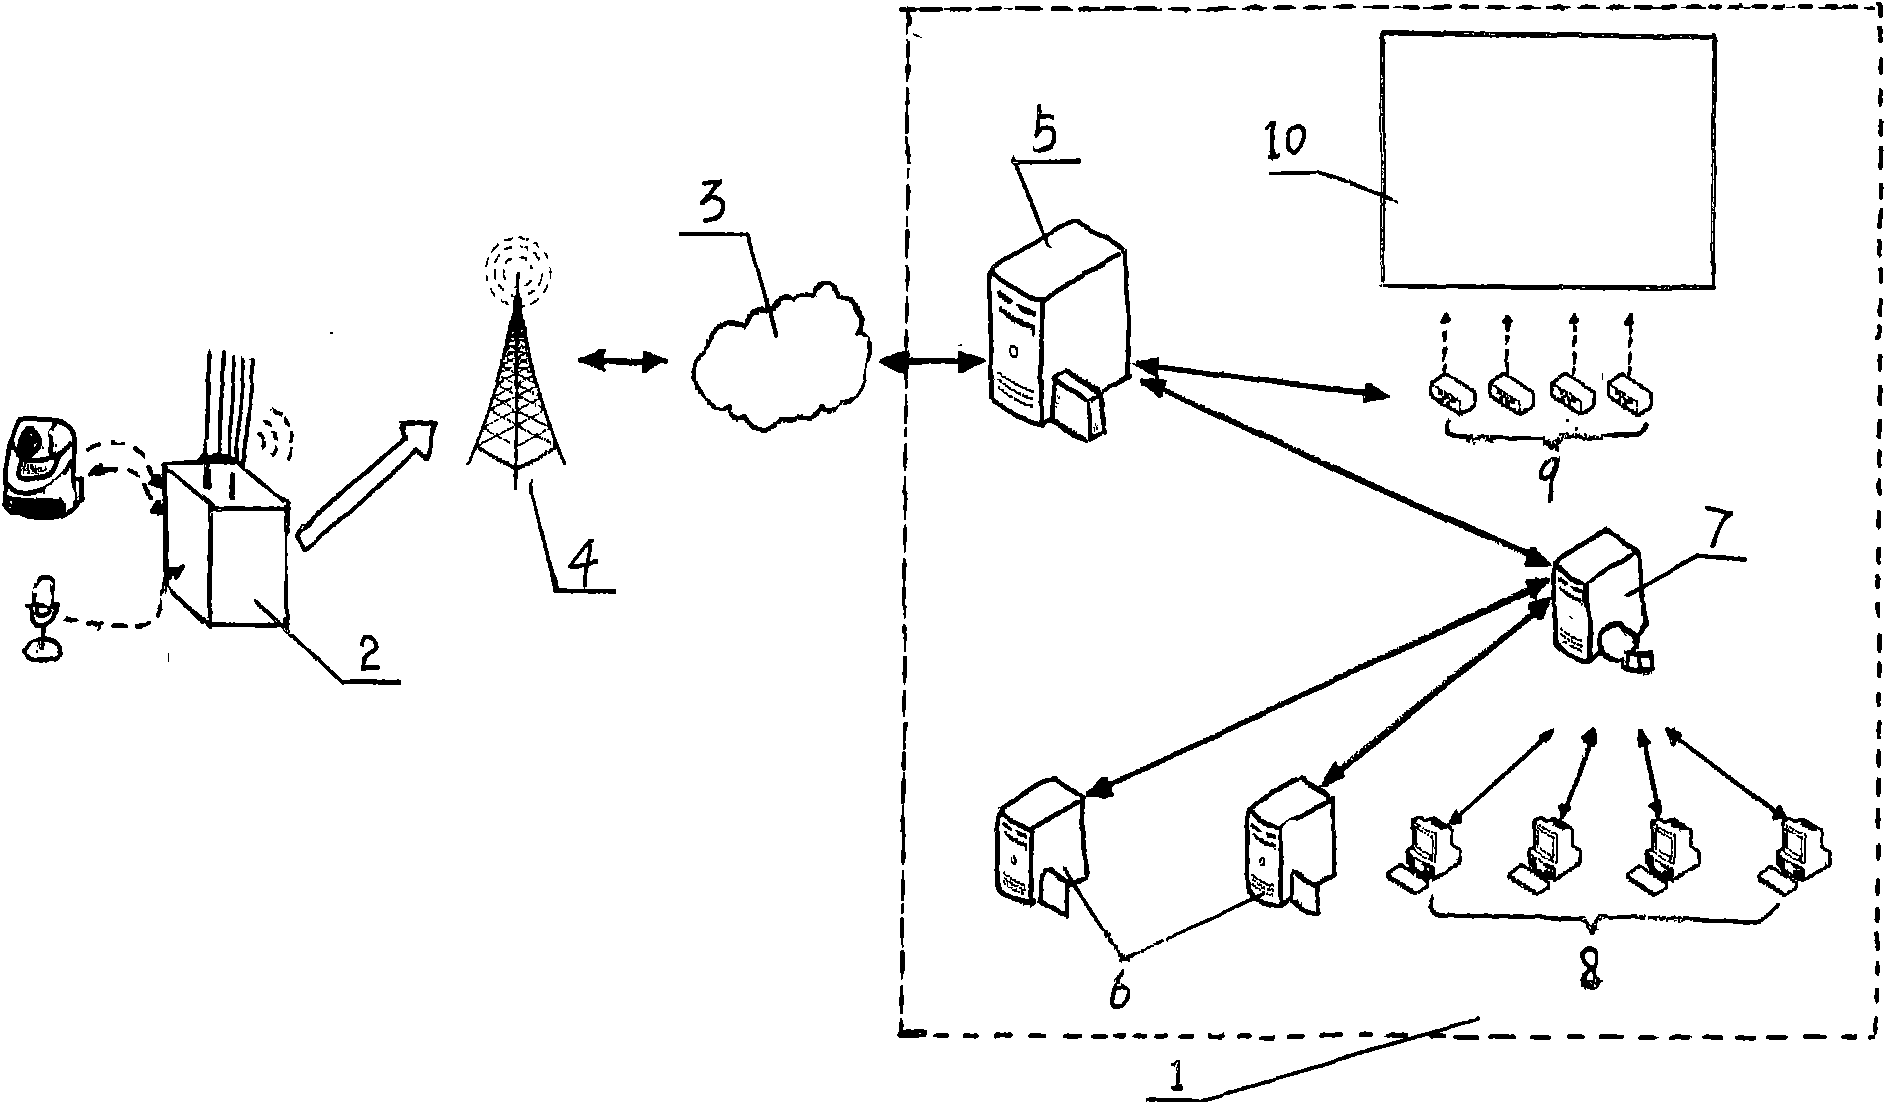 Wireless mobile audio-video transmission system